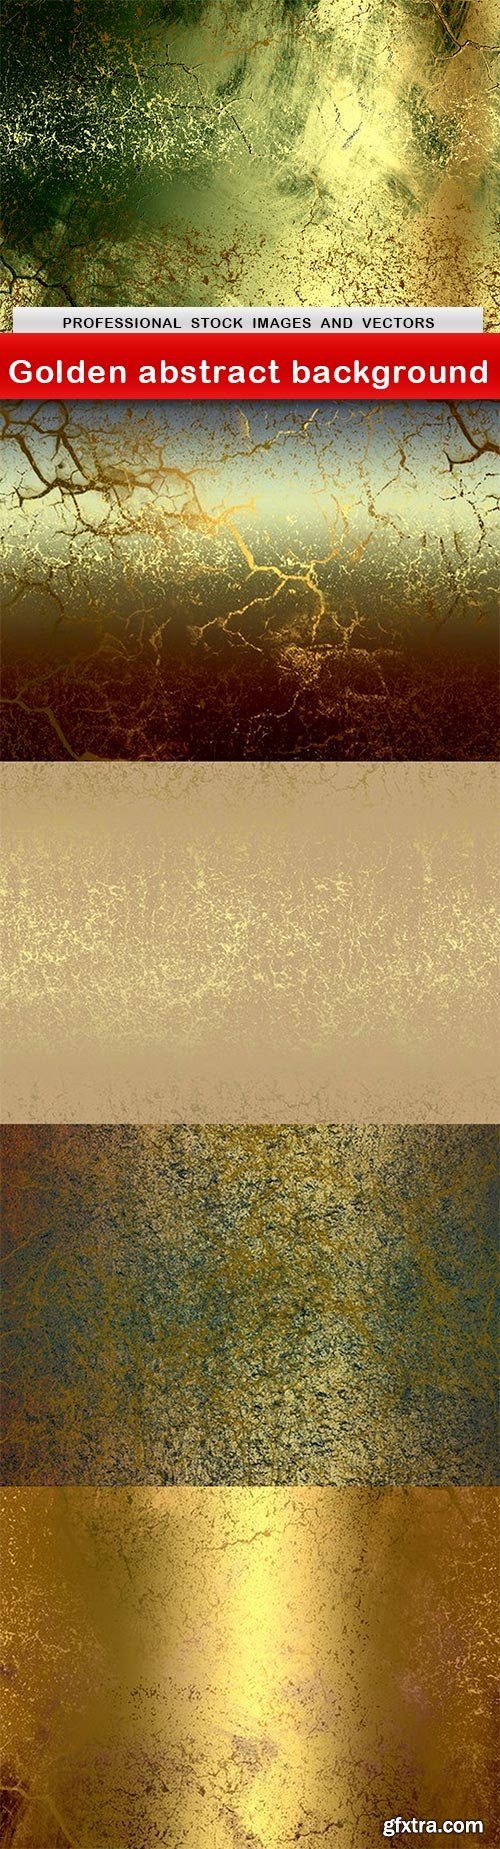 Golden abstract background - 5 UHQ JPEG